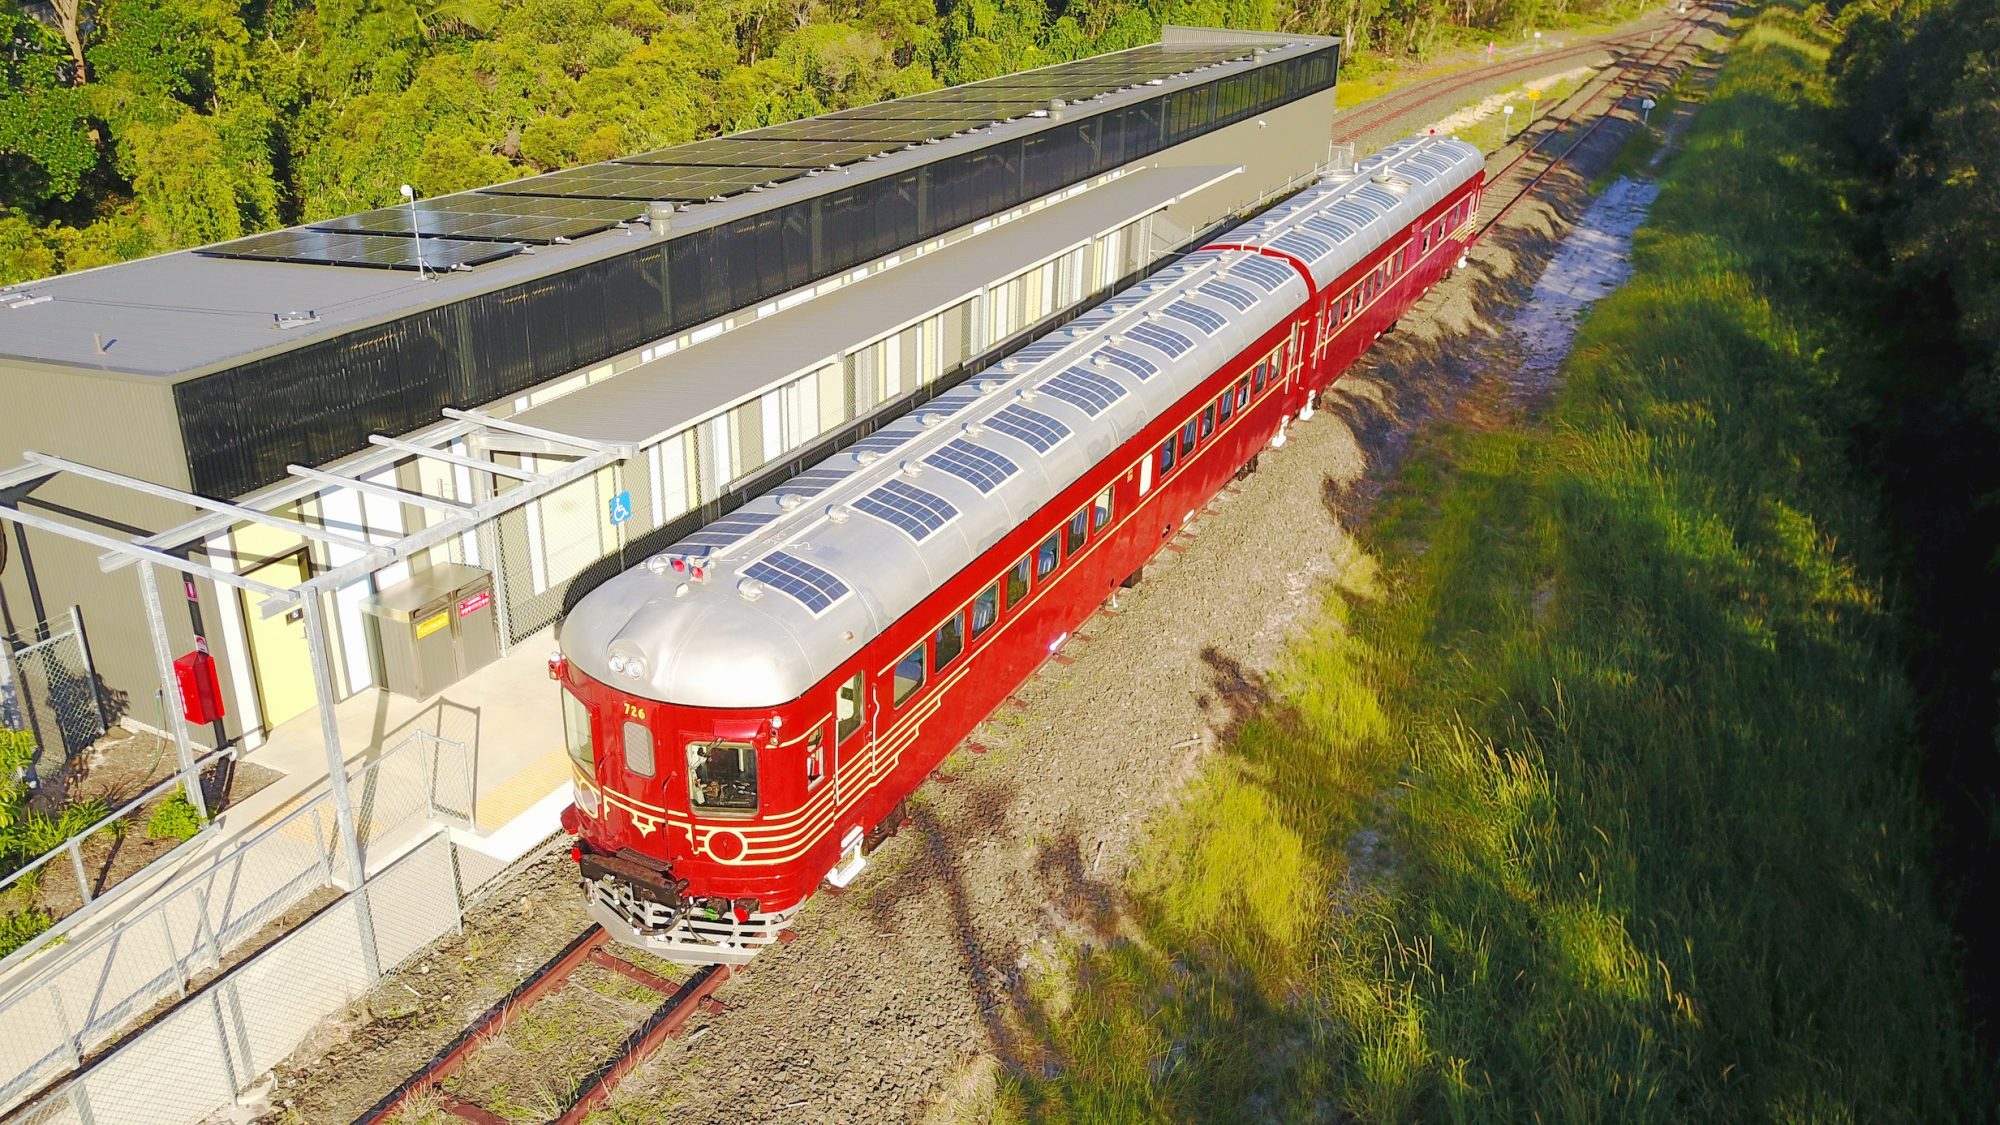 Byron Bay is home to the world's first solar-powered train